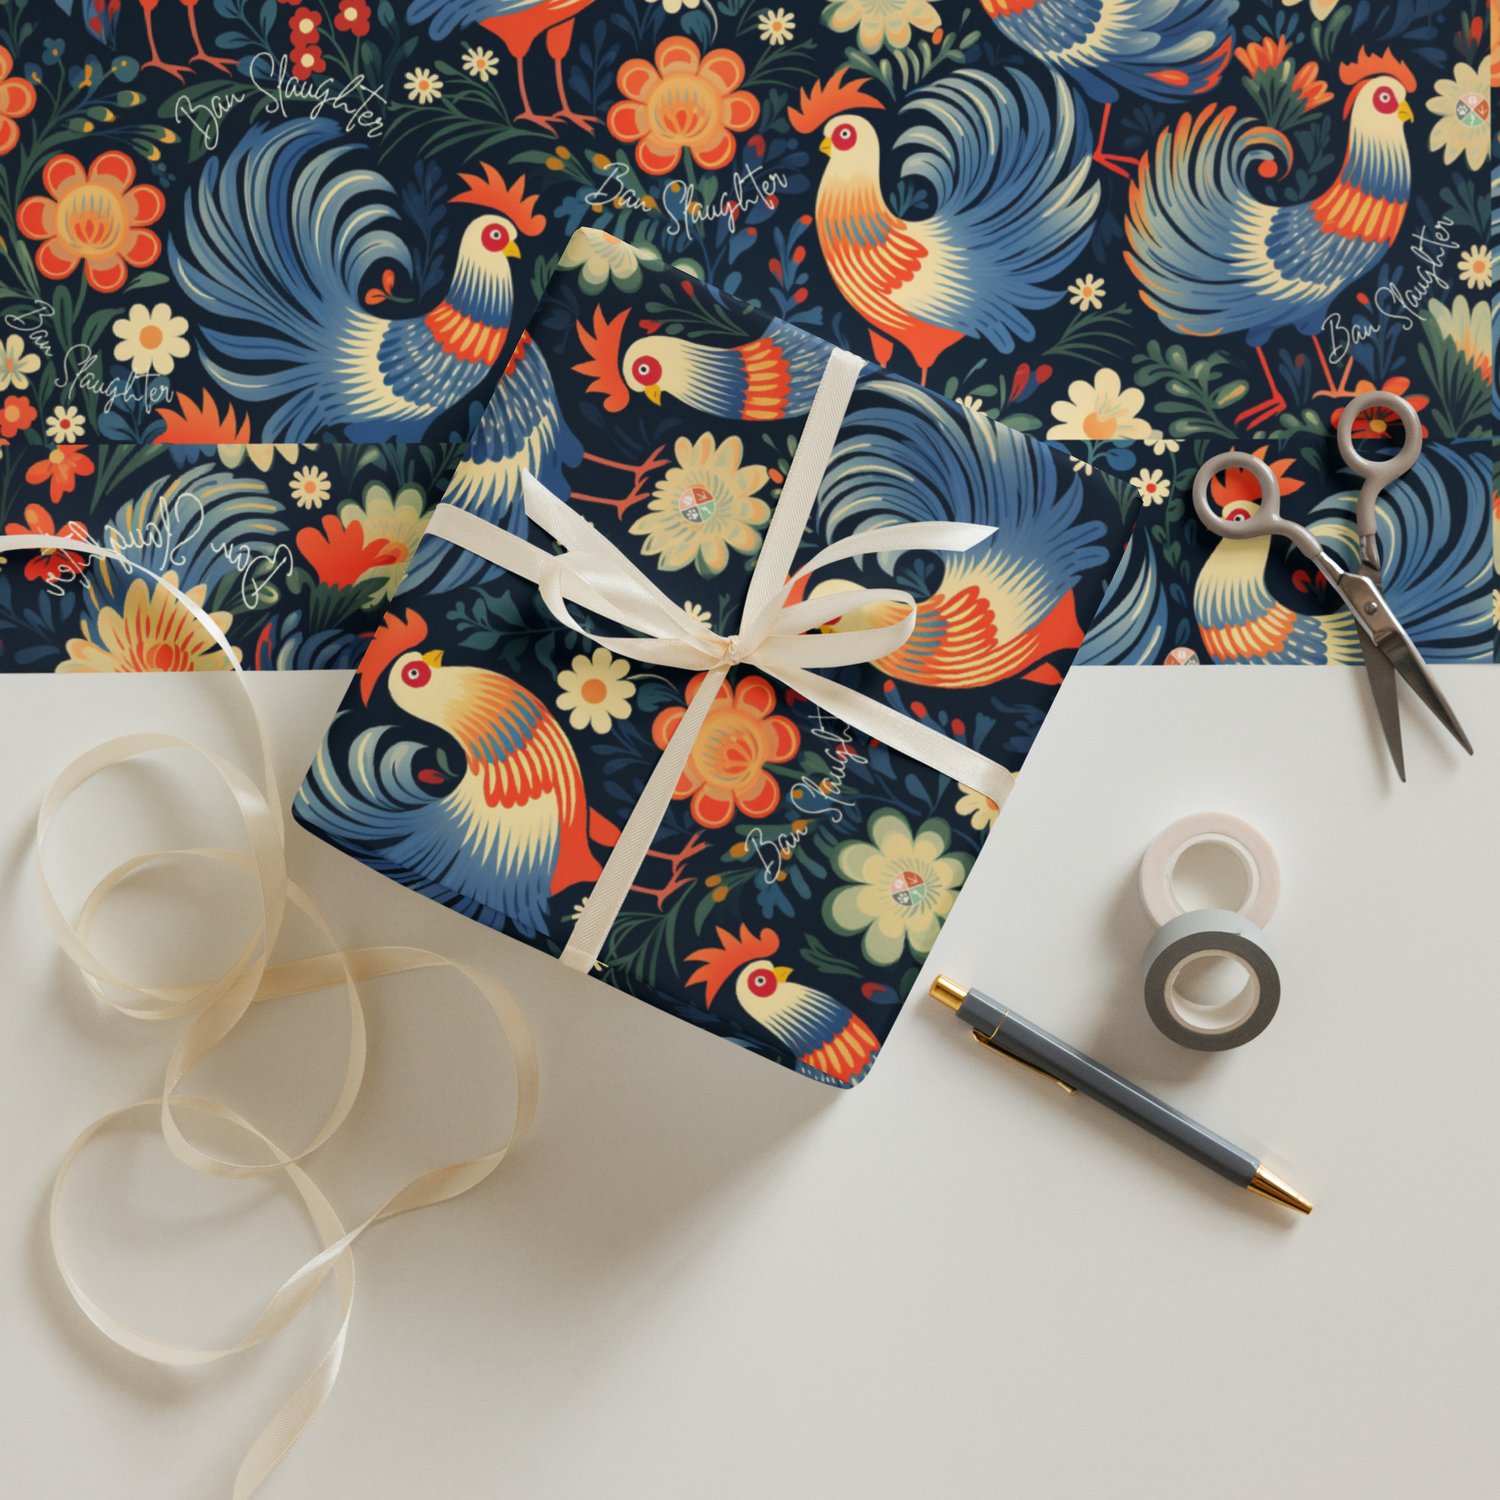 Slaughter-Free Chickens Wrapping paper sheets — Our Honor